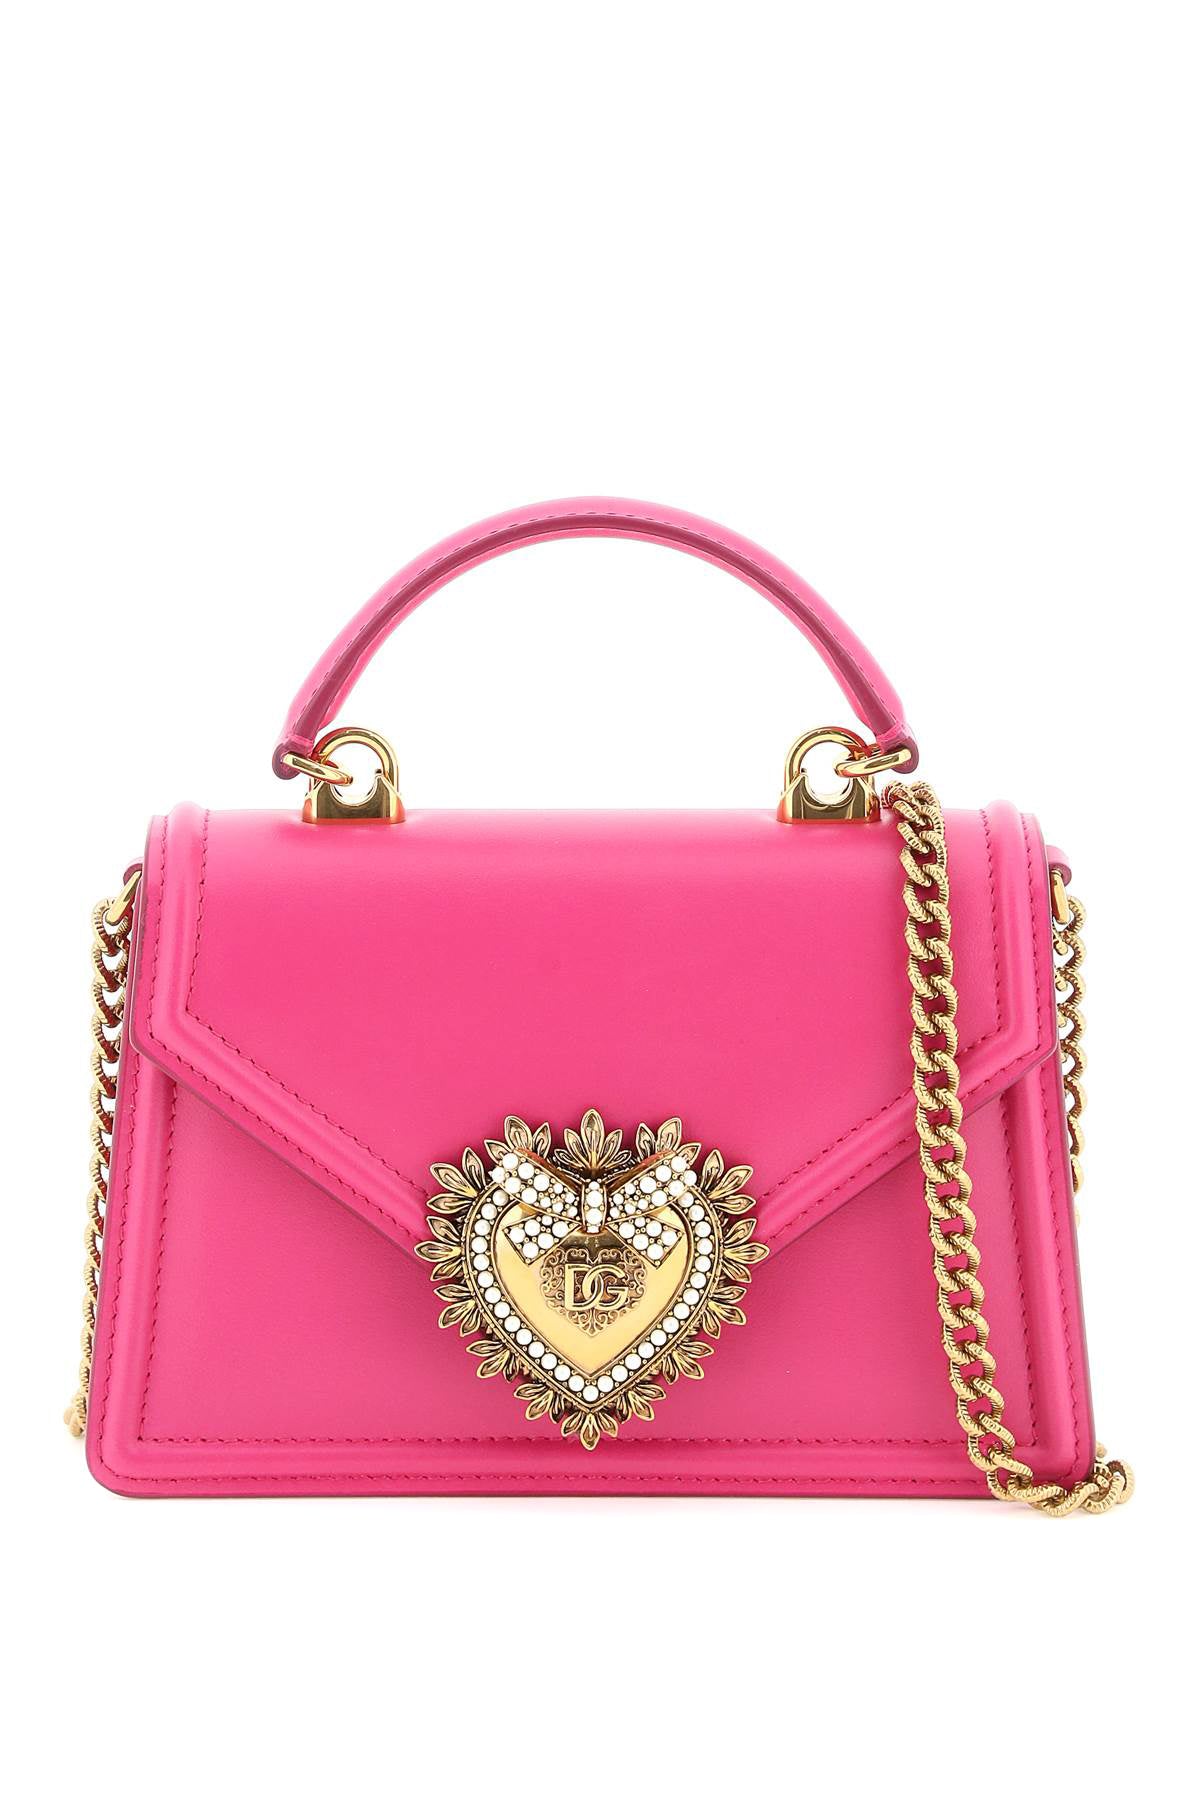 Exquisite Fuchsia Leather Handbag with Metal Heart by Italian Designers